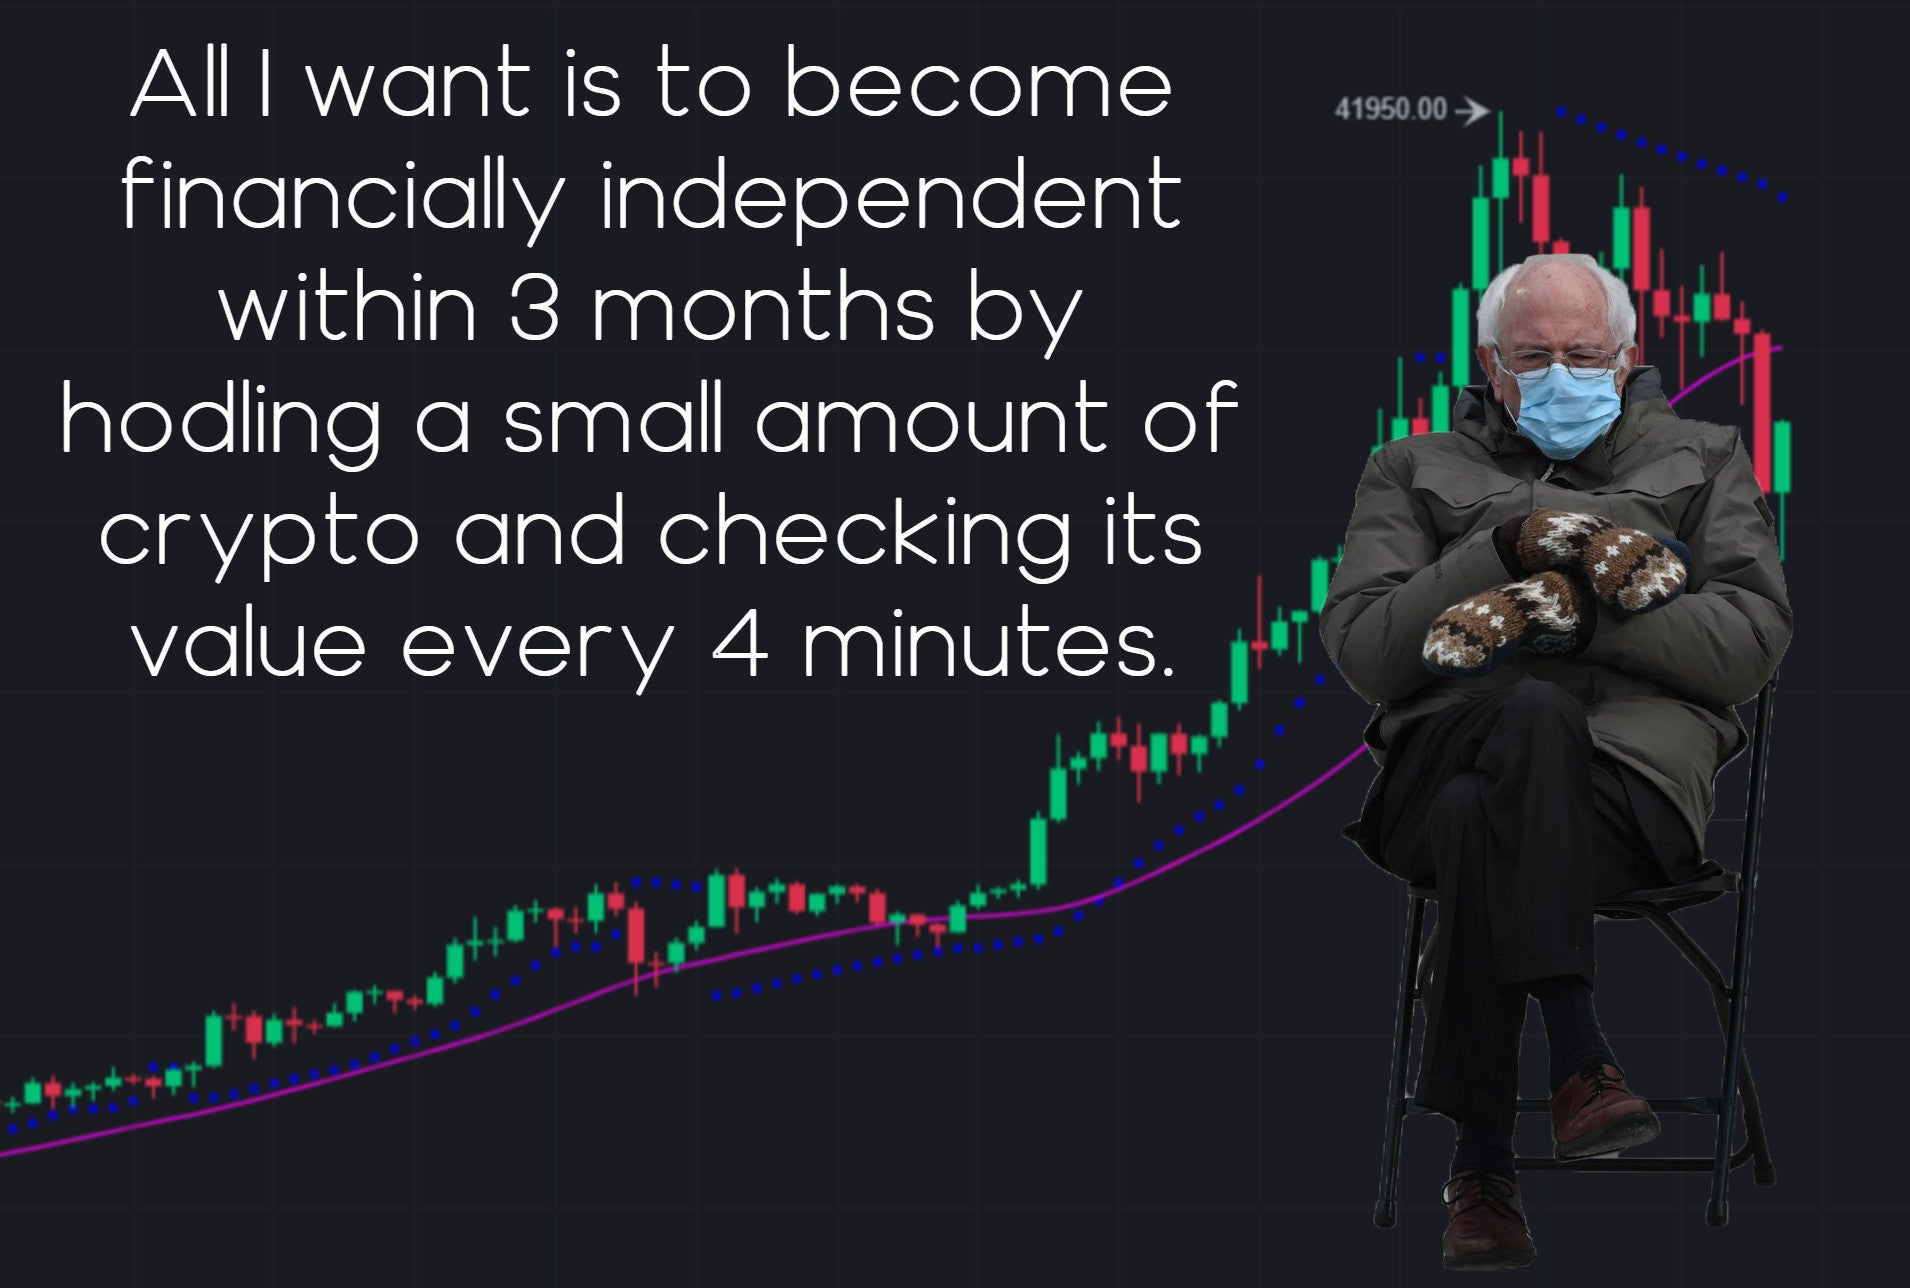 funny pictures - human - 41950 00 All want is to become financially independent within 3 months by hodling a small amount of crypto and checking its value every 4 minutes.